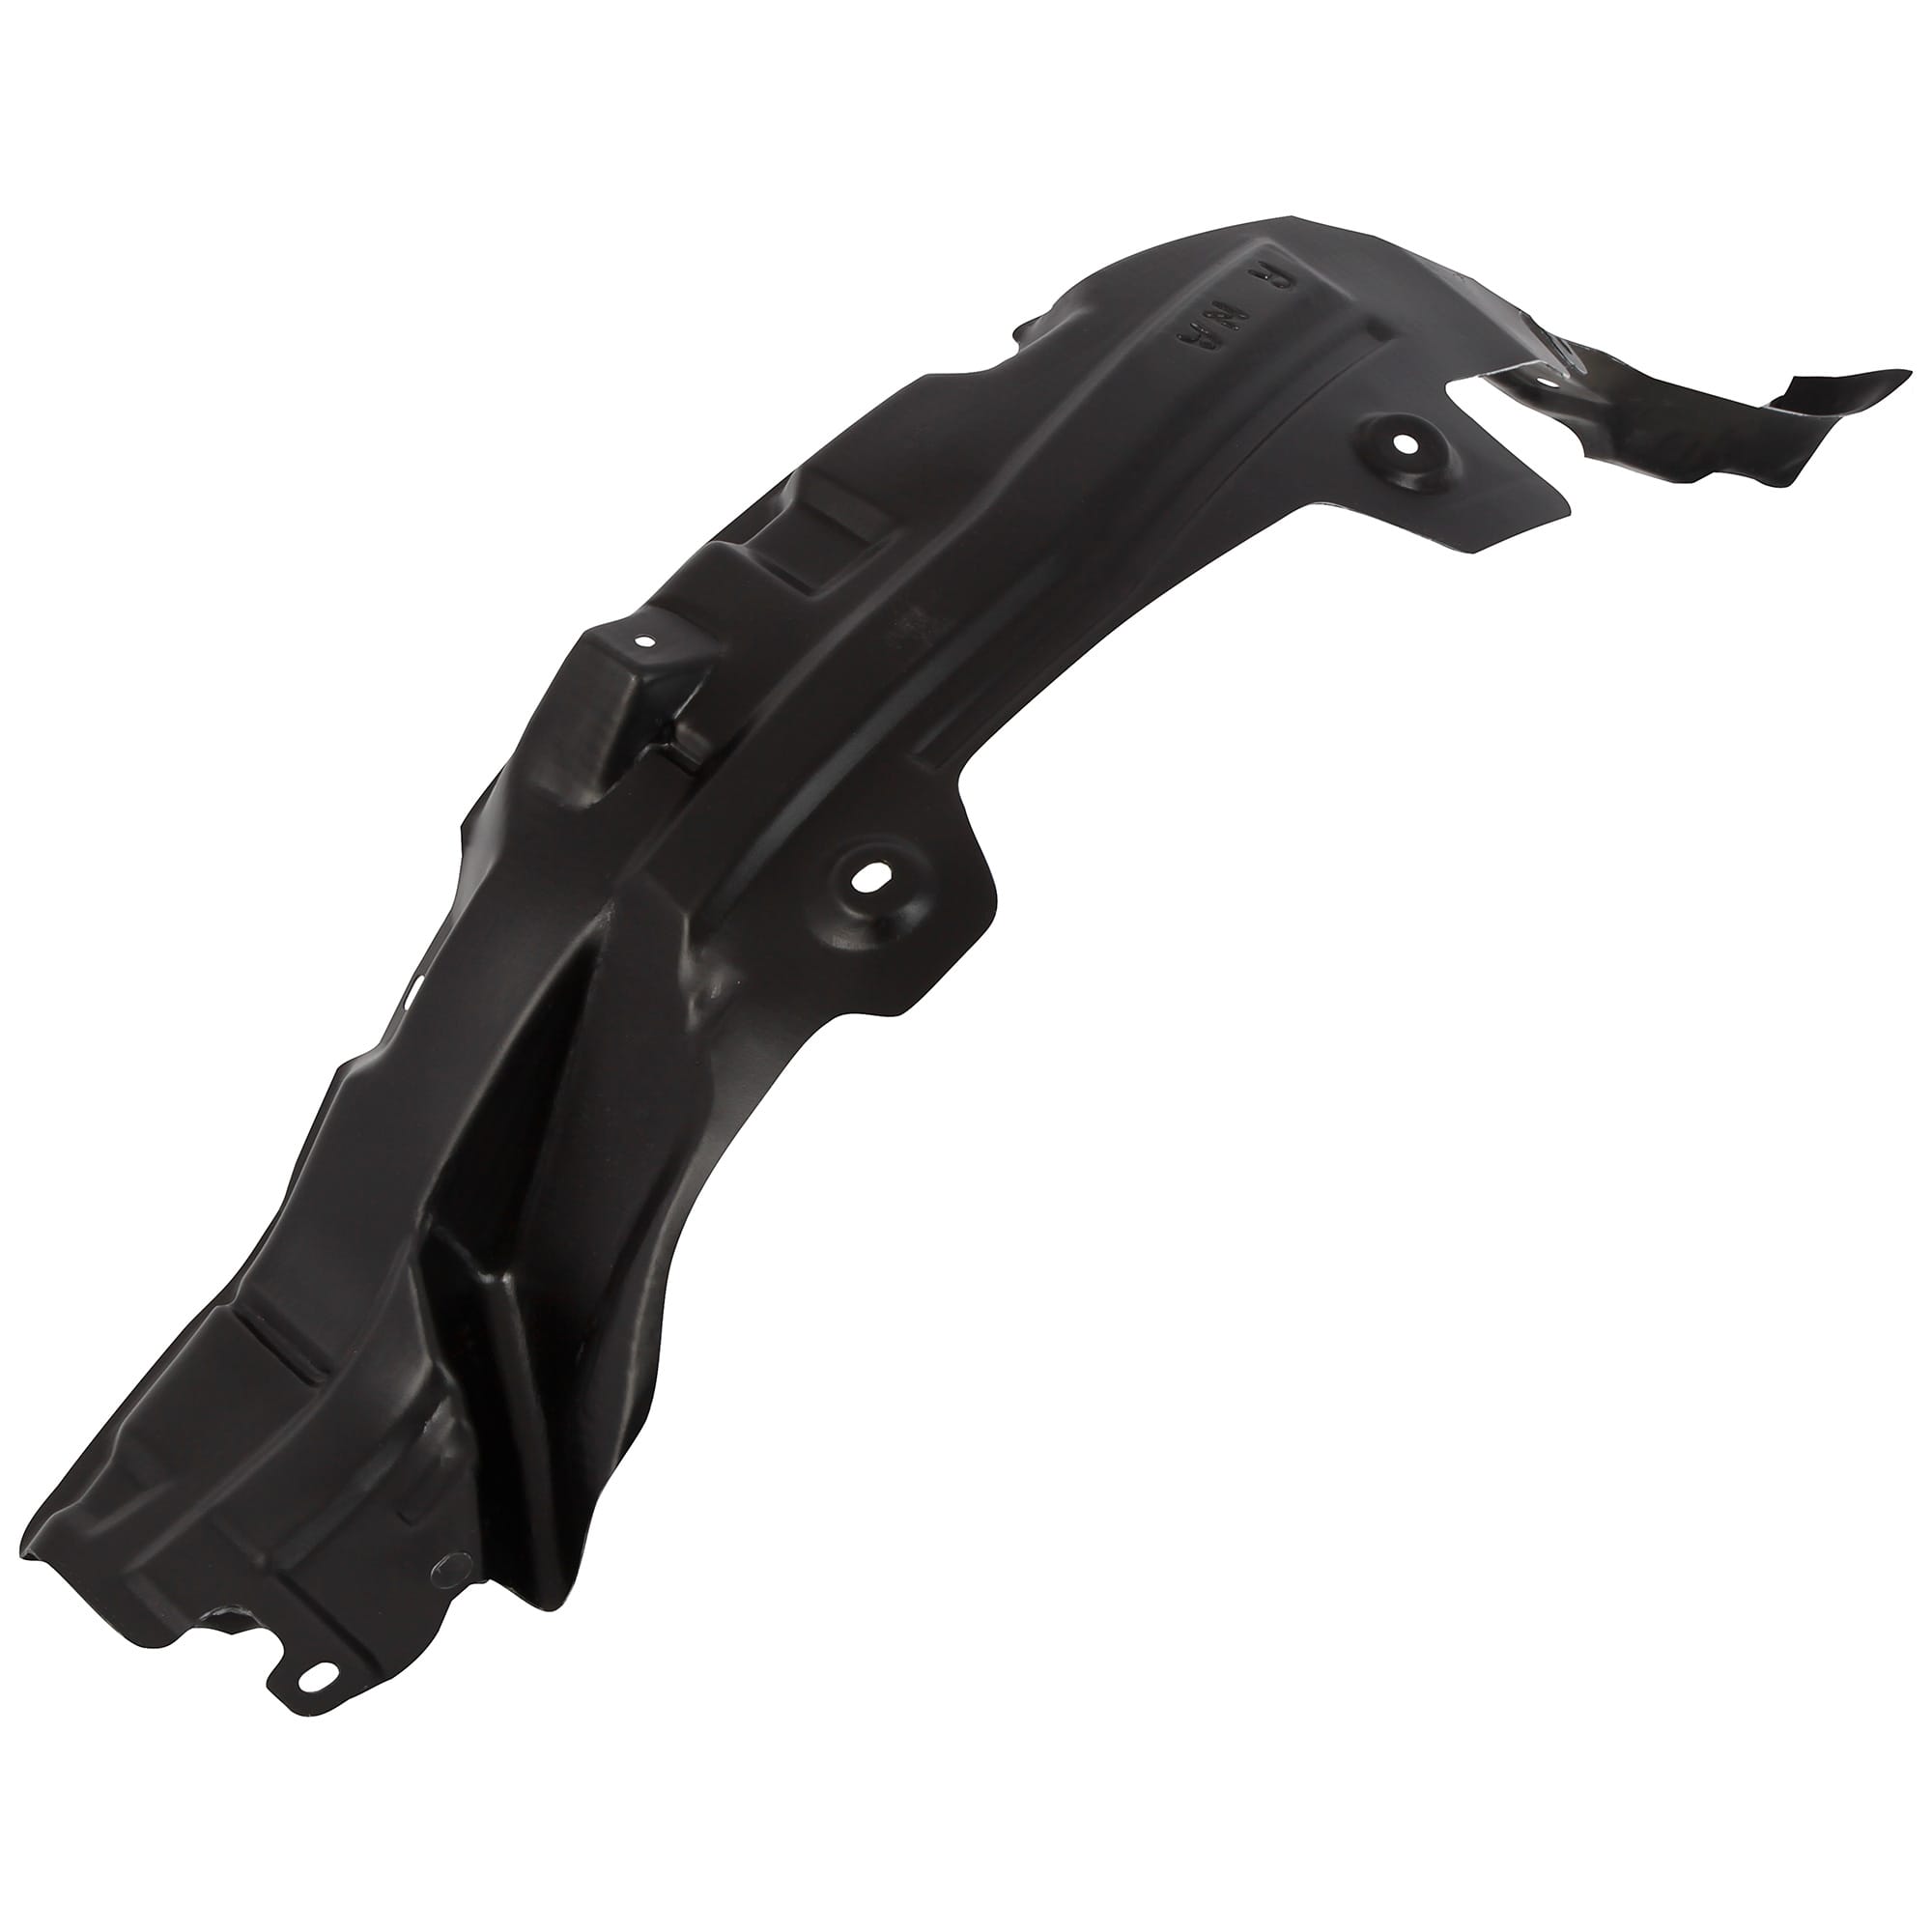 Details about  / Fender Liner Front Driver Side Front Section Fits Mazda MX-5 Miata MA1248137